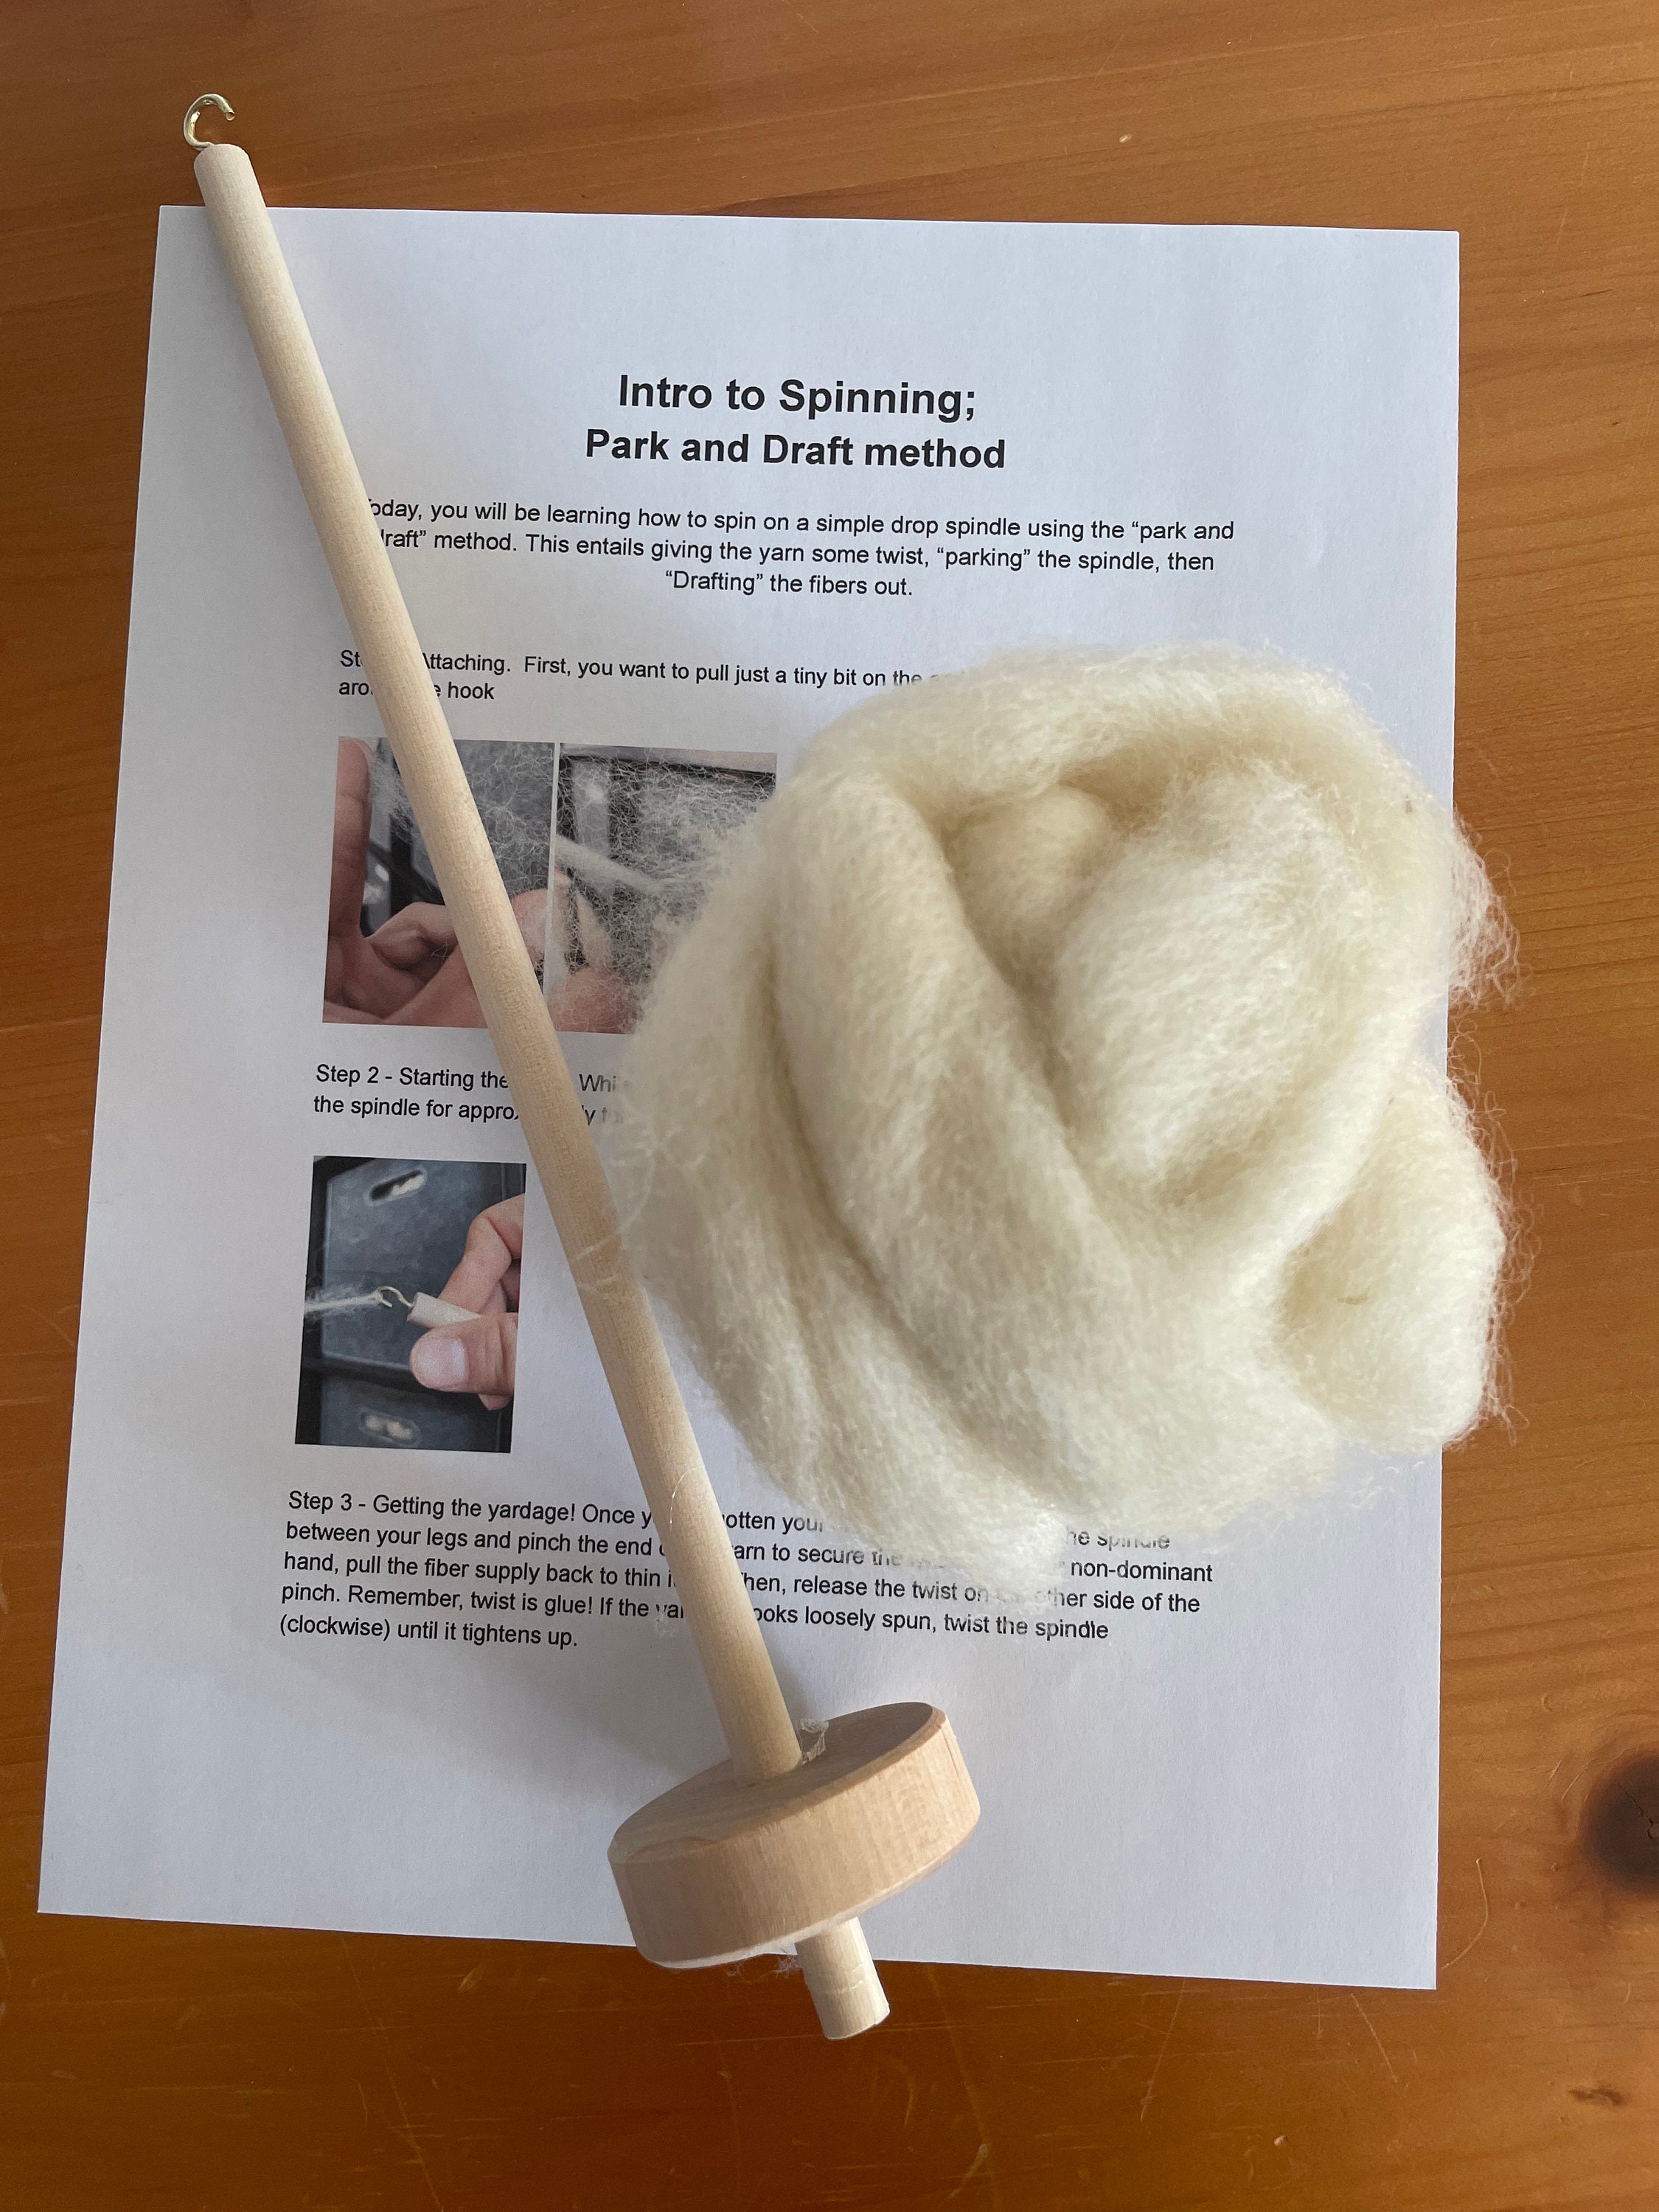 Hand spinning yarn on a drop spindle 